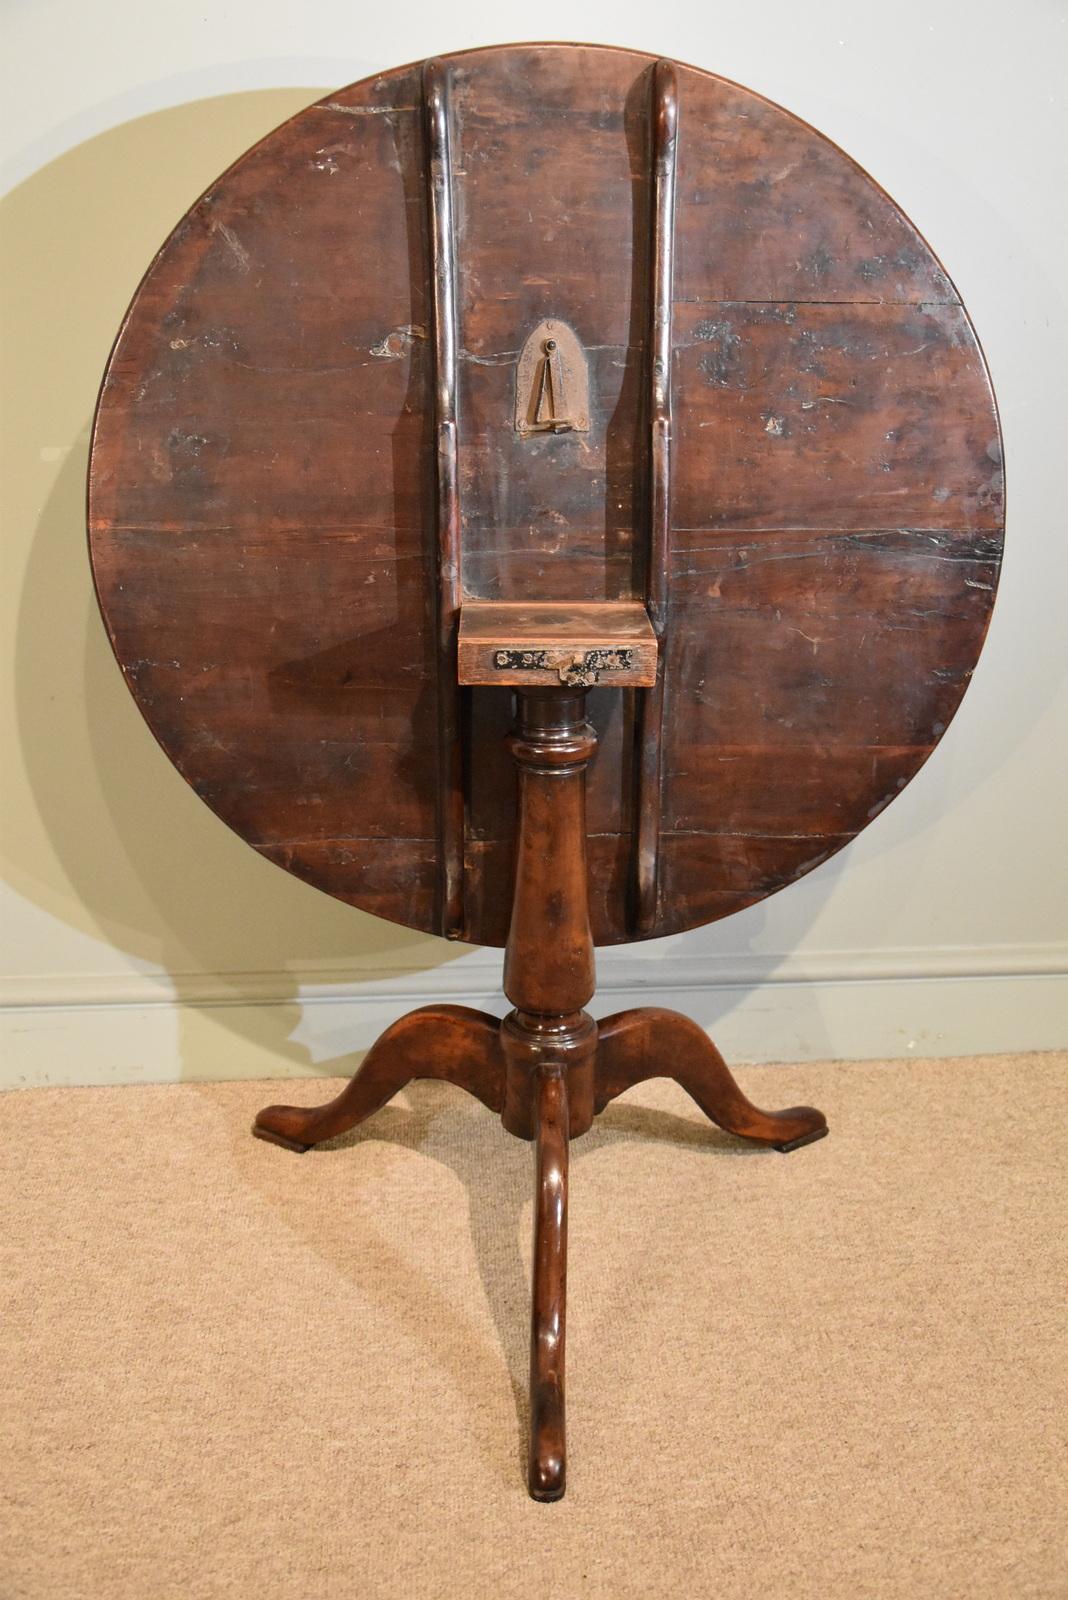 An extremely rare 18th century Yew wood snap top tripod table with exceptional colour and patination

Dimensions:
Height 27